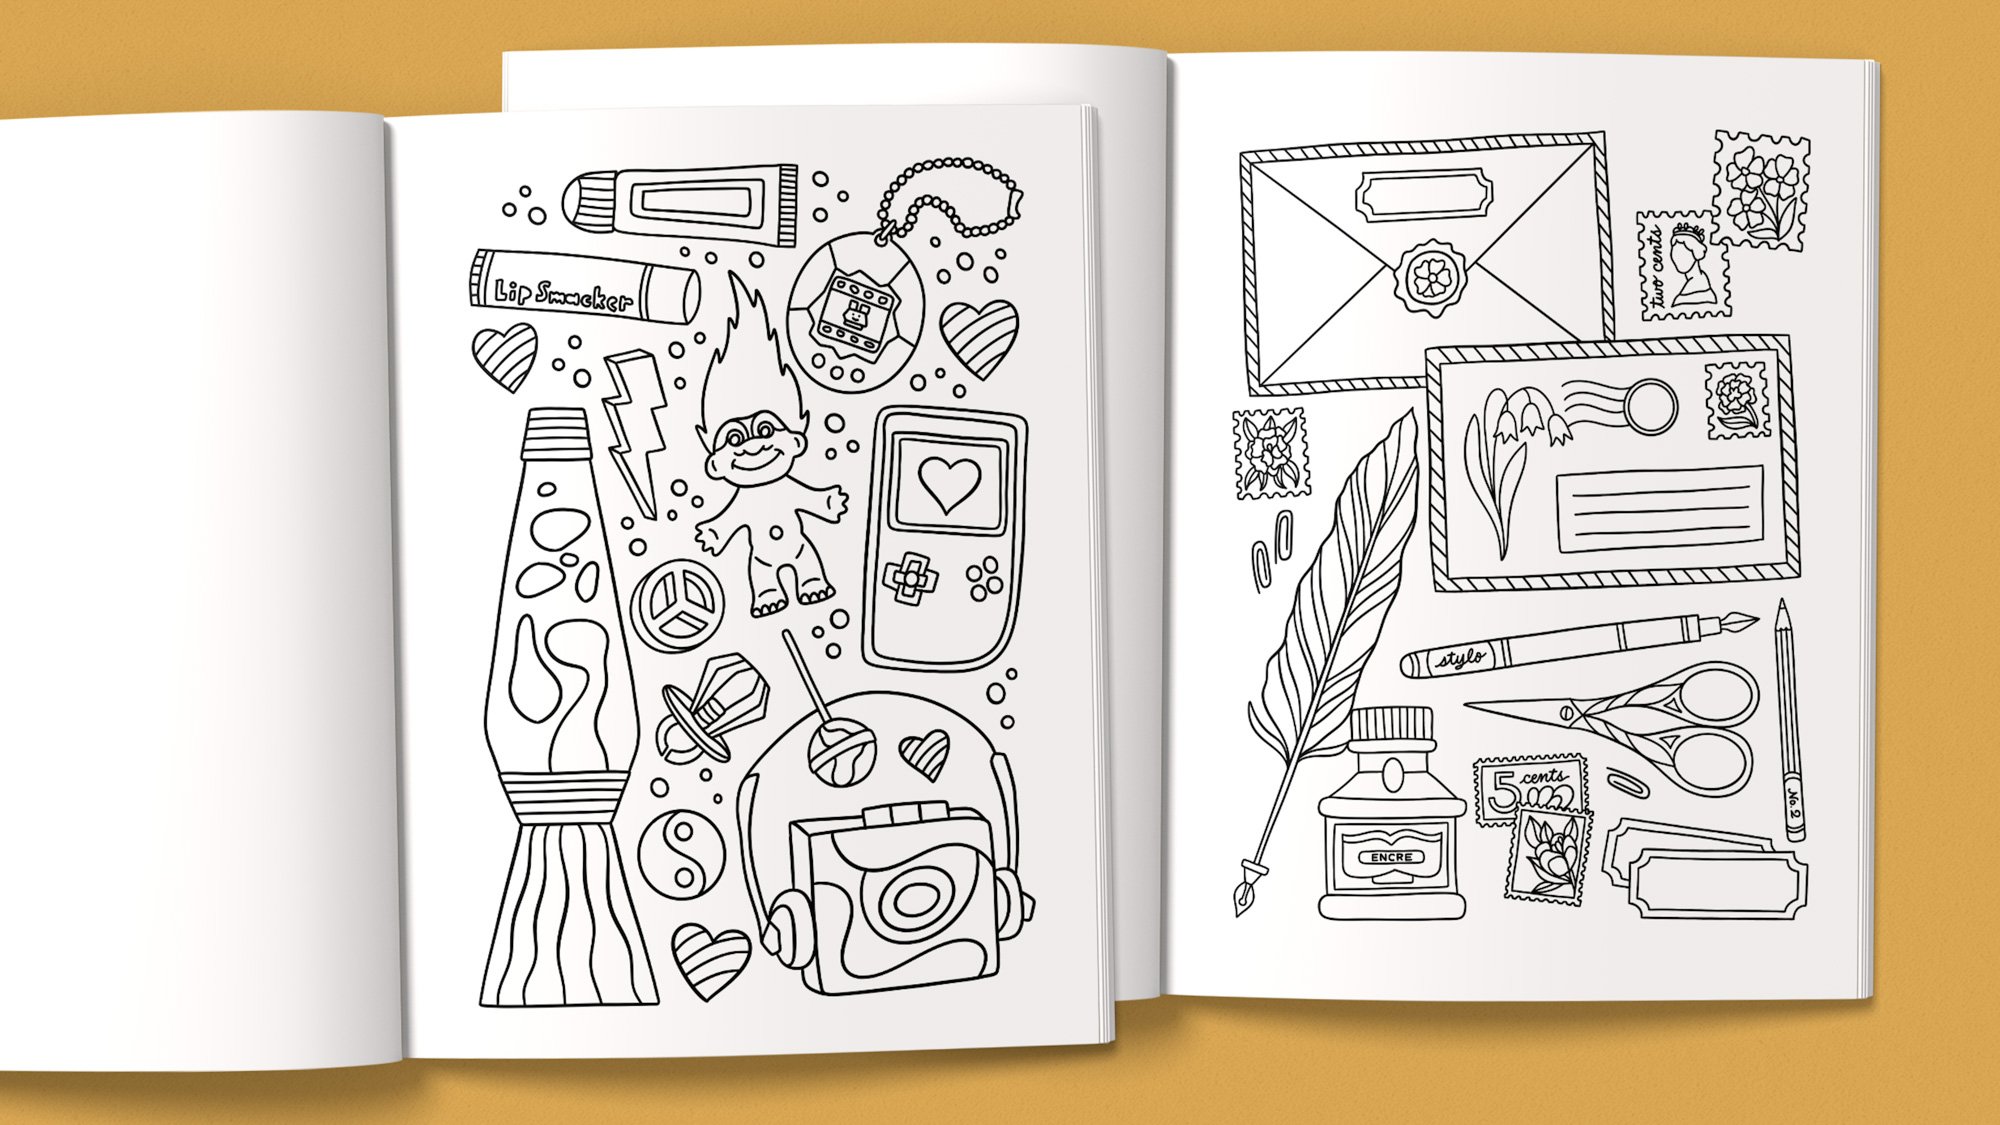 Coloring Books - We Design, Create, Sell, Print & Publish